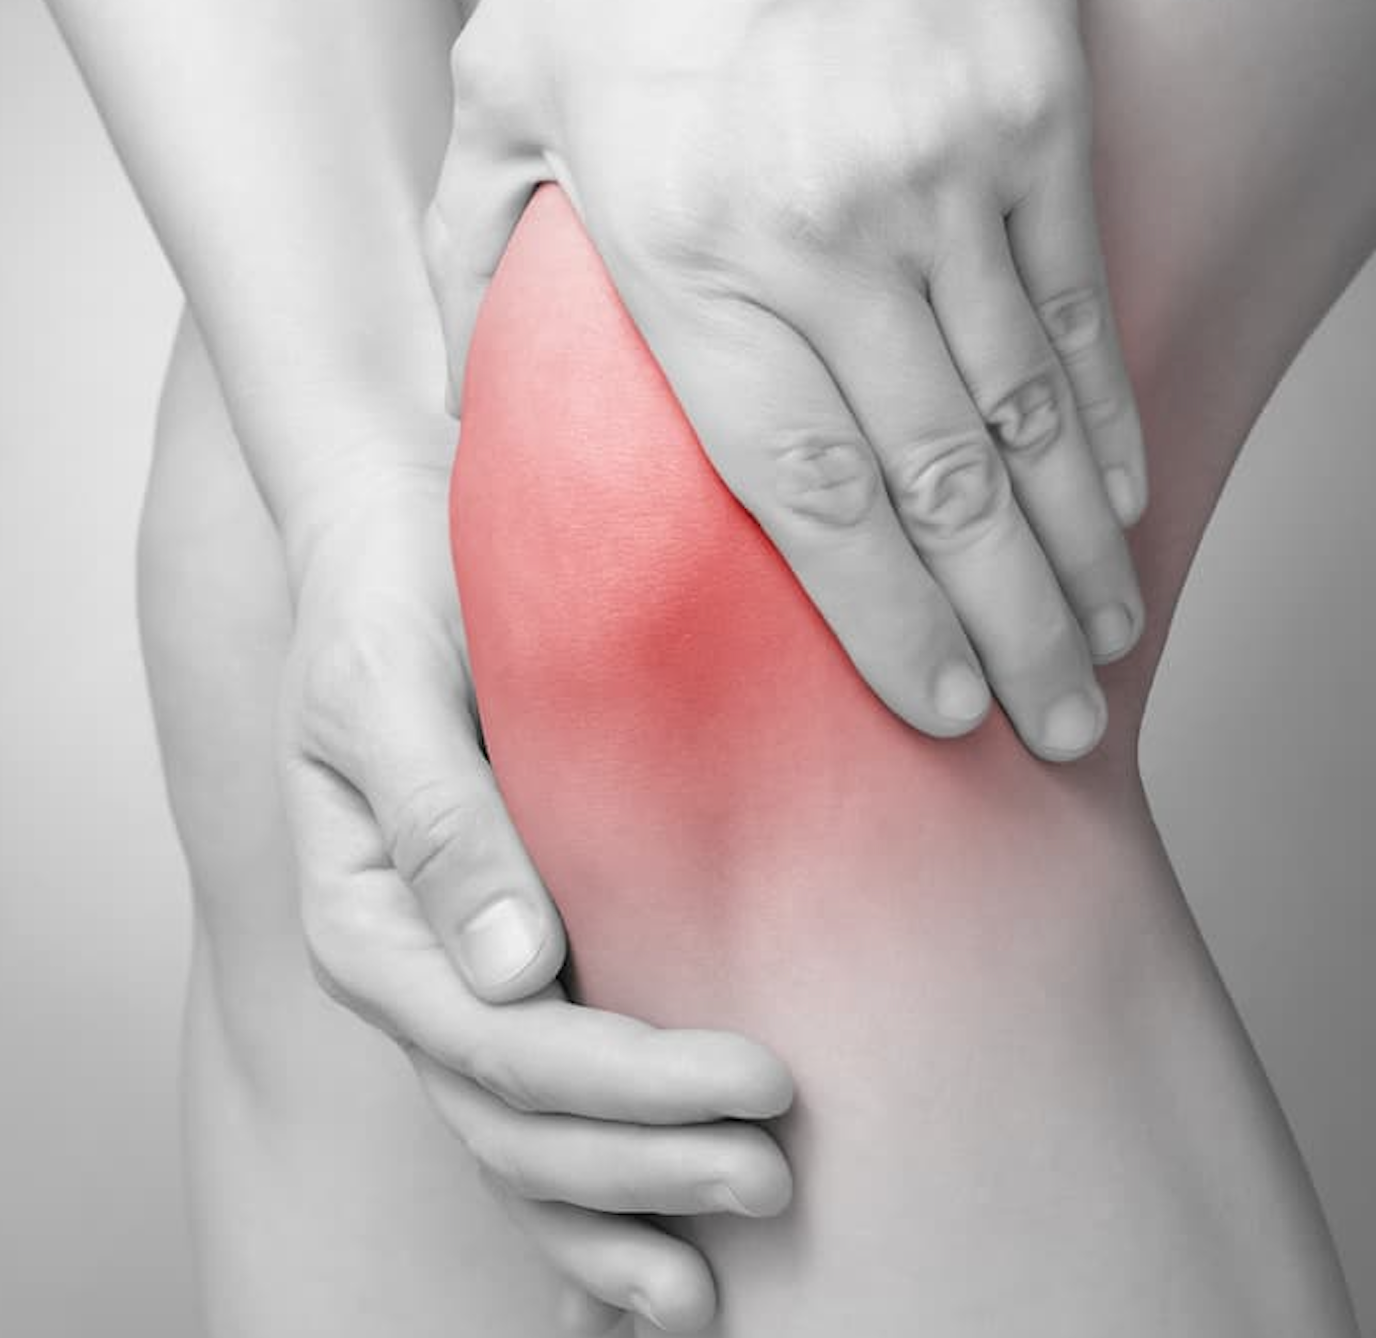 ReNu Achieves Primary Endpoint in Phase 3 Trial for Knee Osteoarthritis